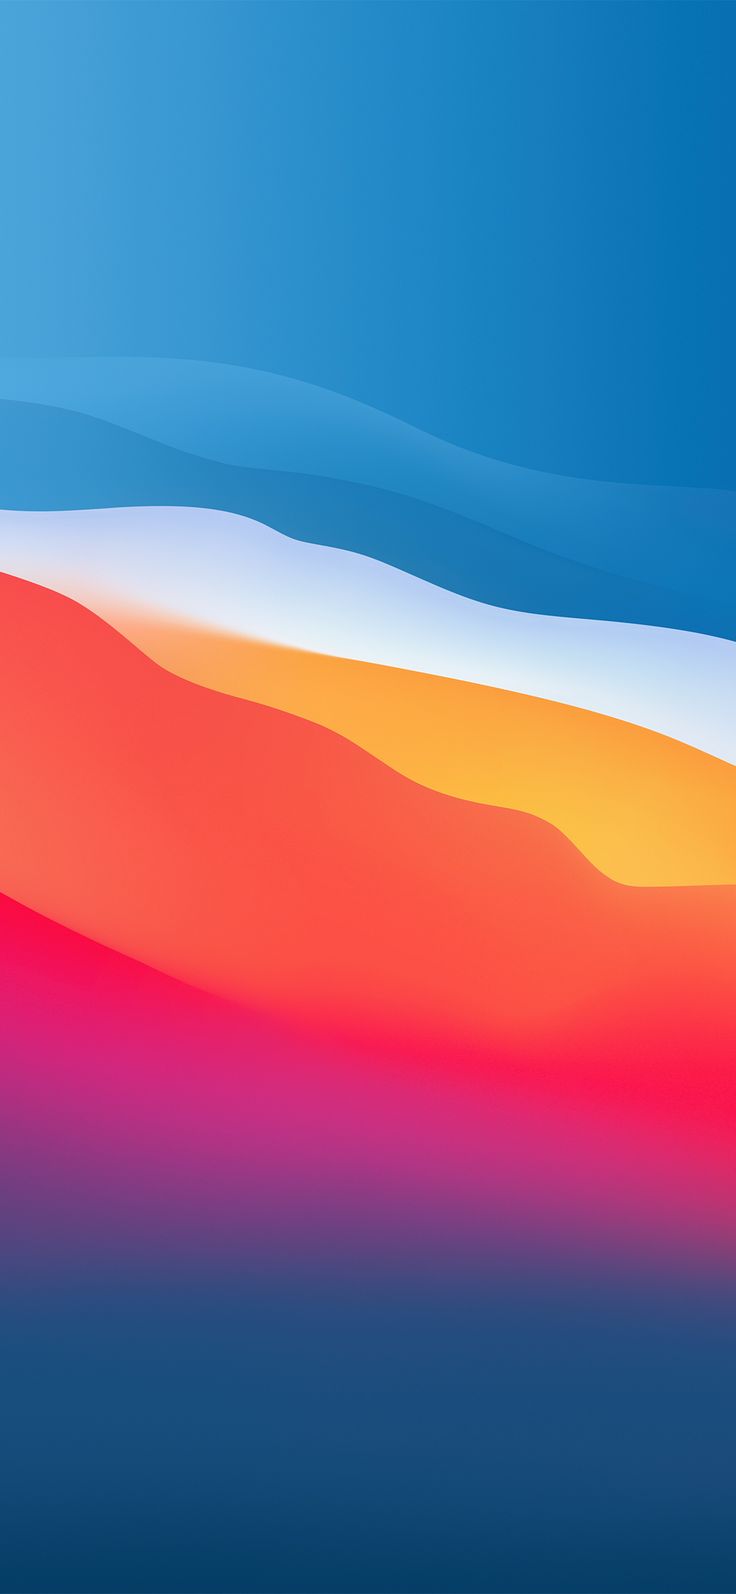 Macos Big Sur Daylight Wallpapers